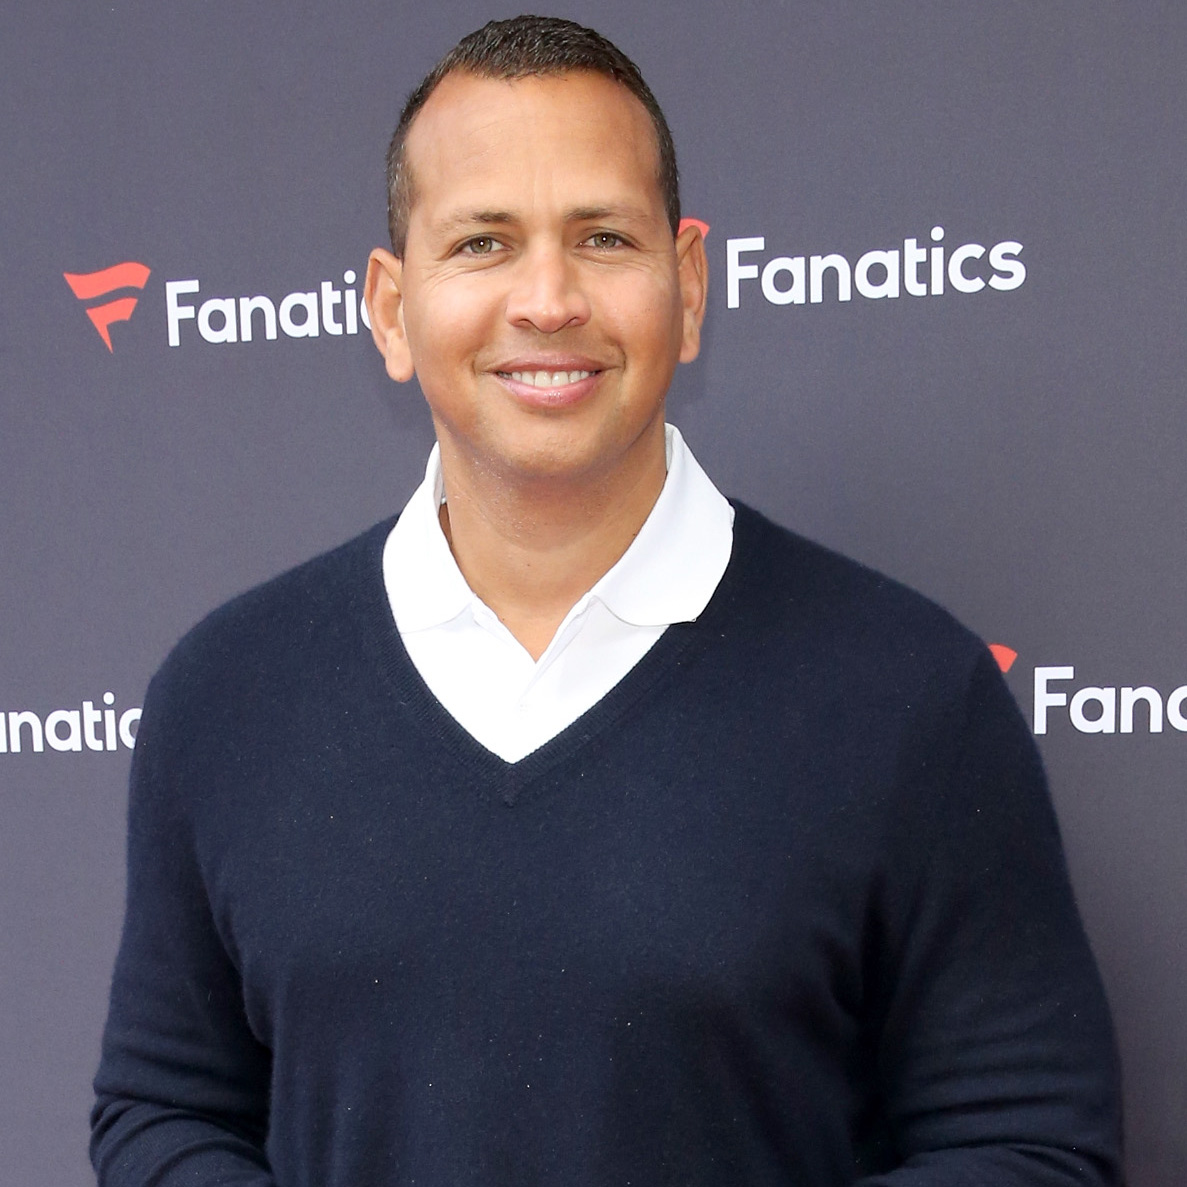 Who Is Alex Rodriguez's Ex-Wife? Plus More Facts About the Baseball Star!